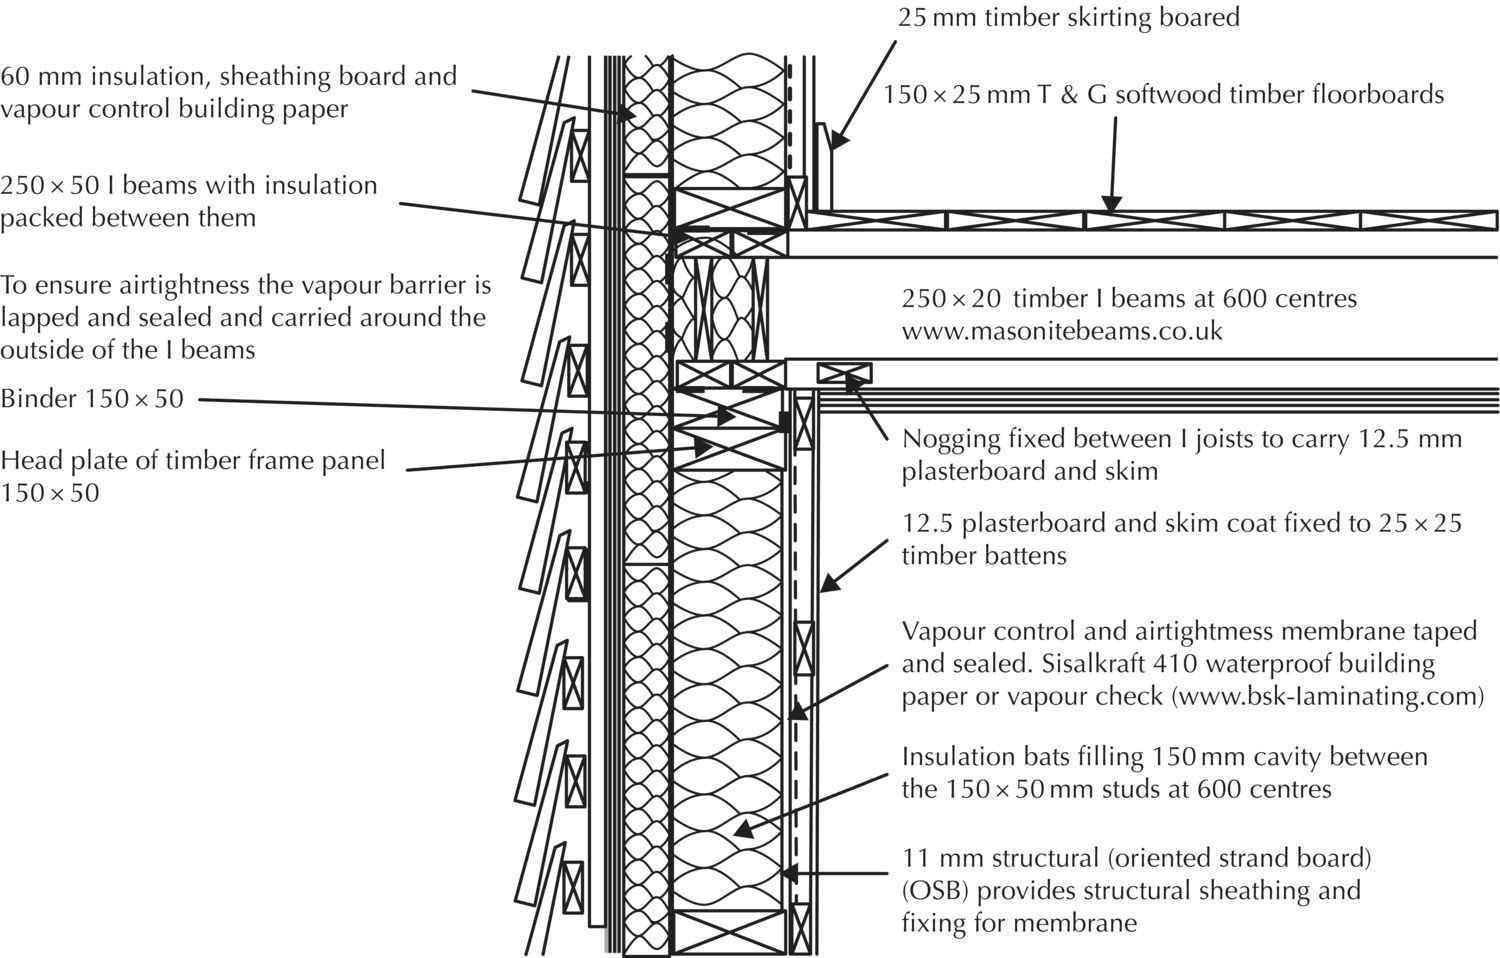 Diagram illustrating the wall to upper floor detail of a tile clad timber frame, with arrows indicating 60 mm insulation, sheathing board and vapour control building paper; 25 mm timber skirting board, etc.